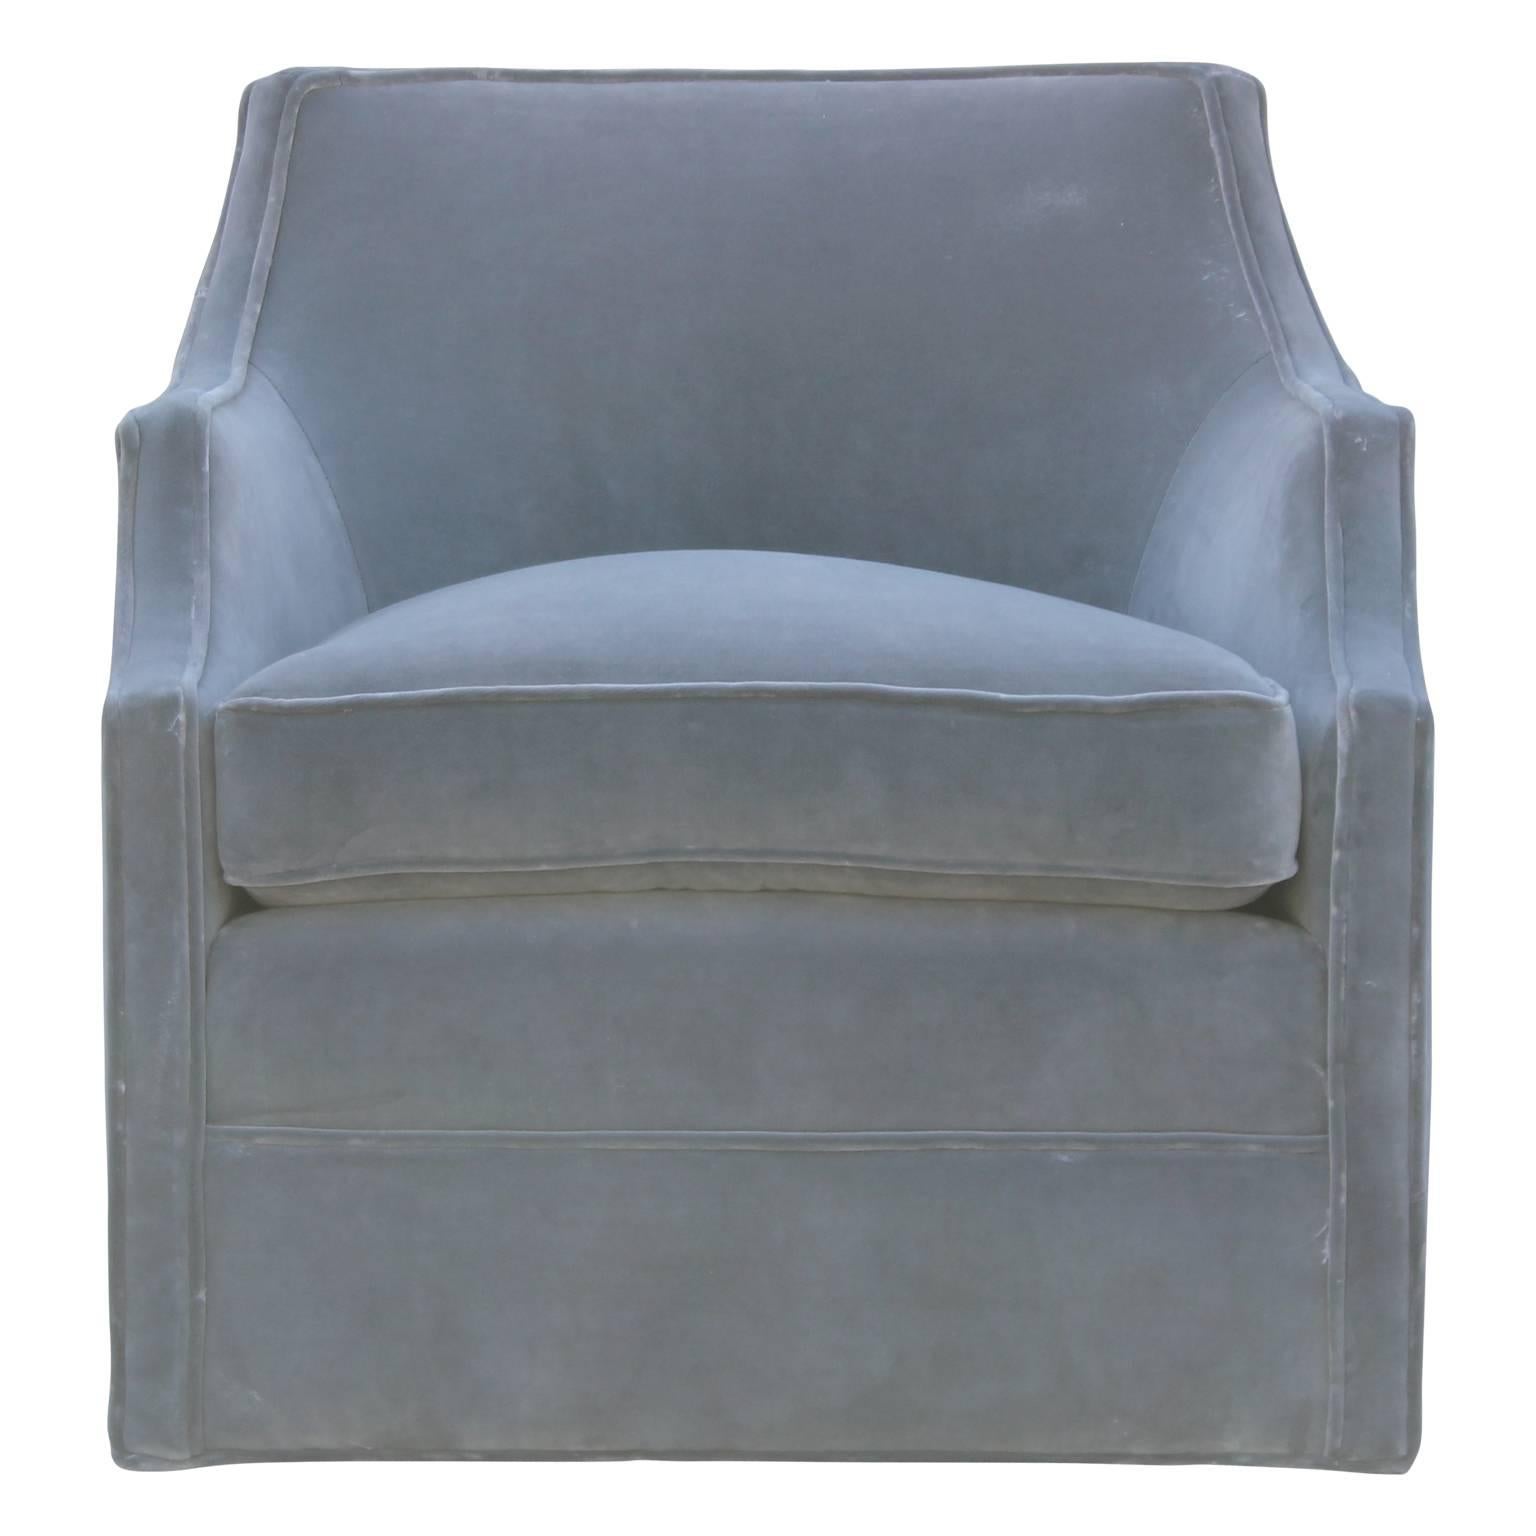 Luxe pair of modern swivel armchairs in the style of Baker Furniture and freshly upholstered in a lush grey velvet.

Measures: Seat height: 20 in.